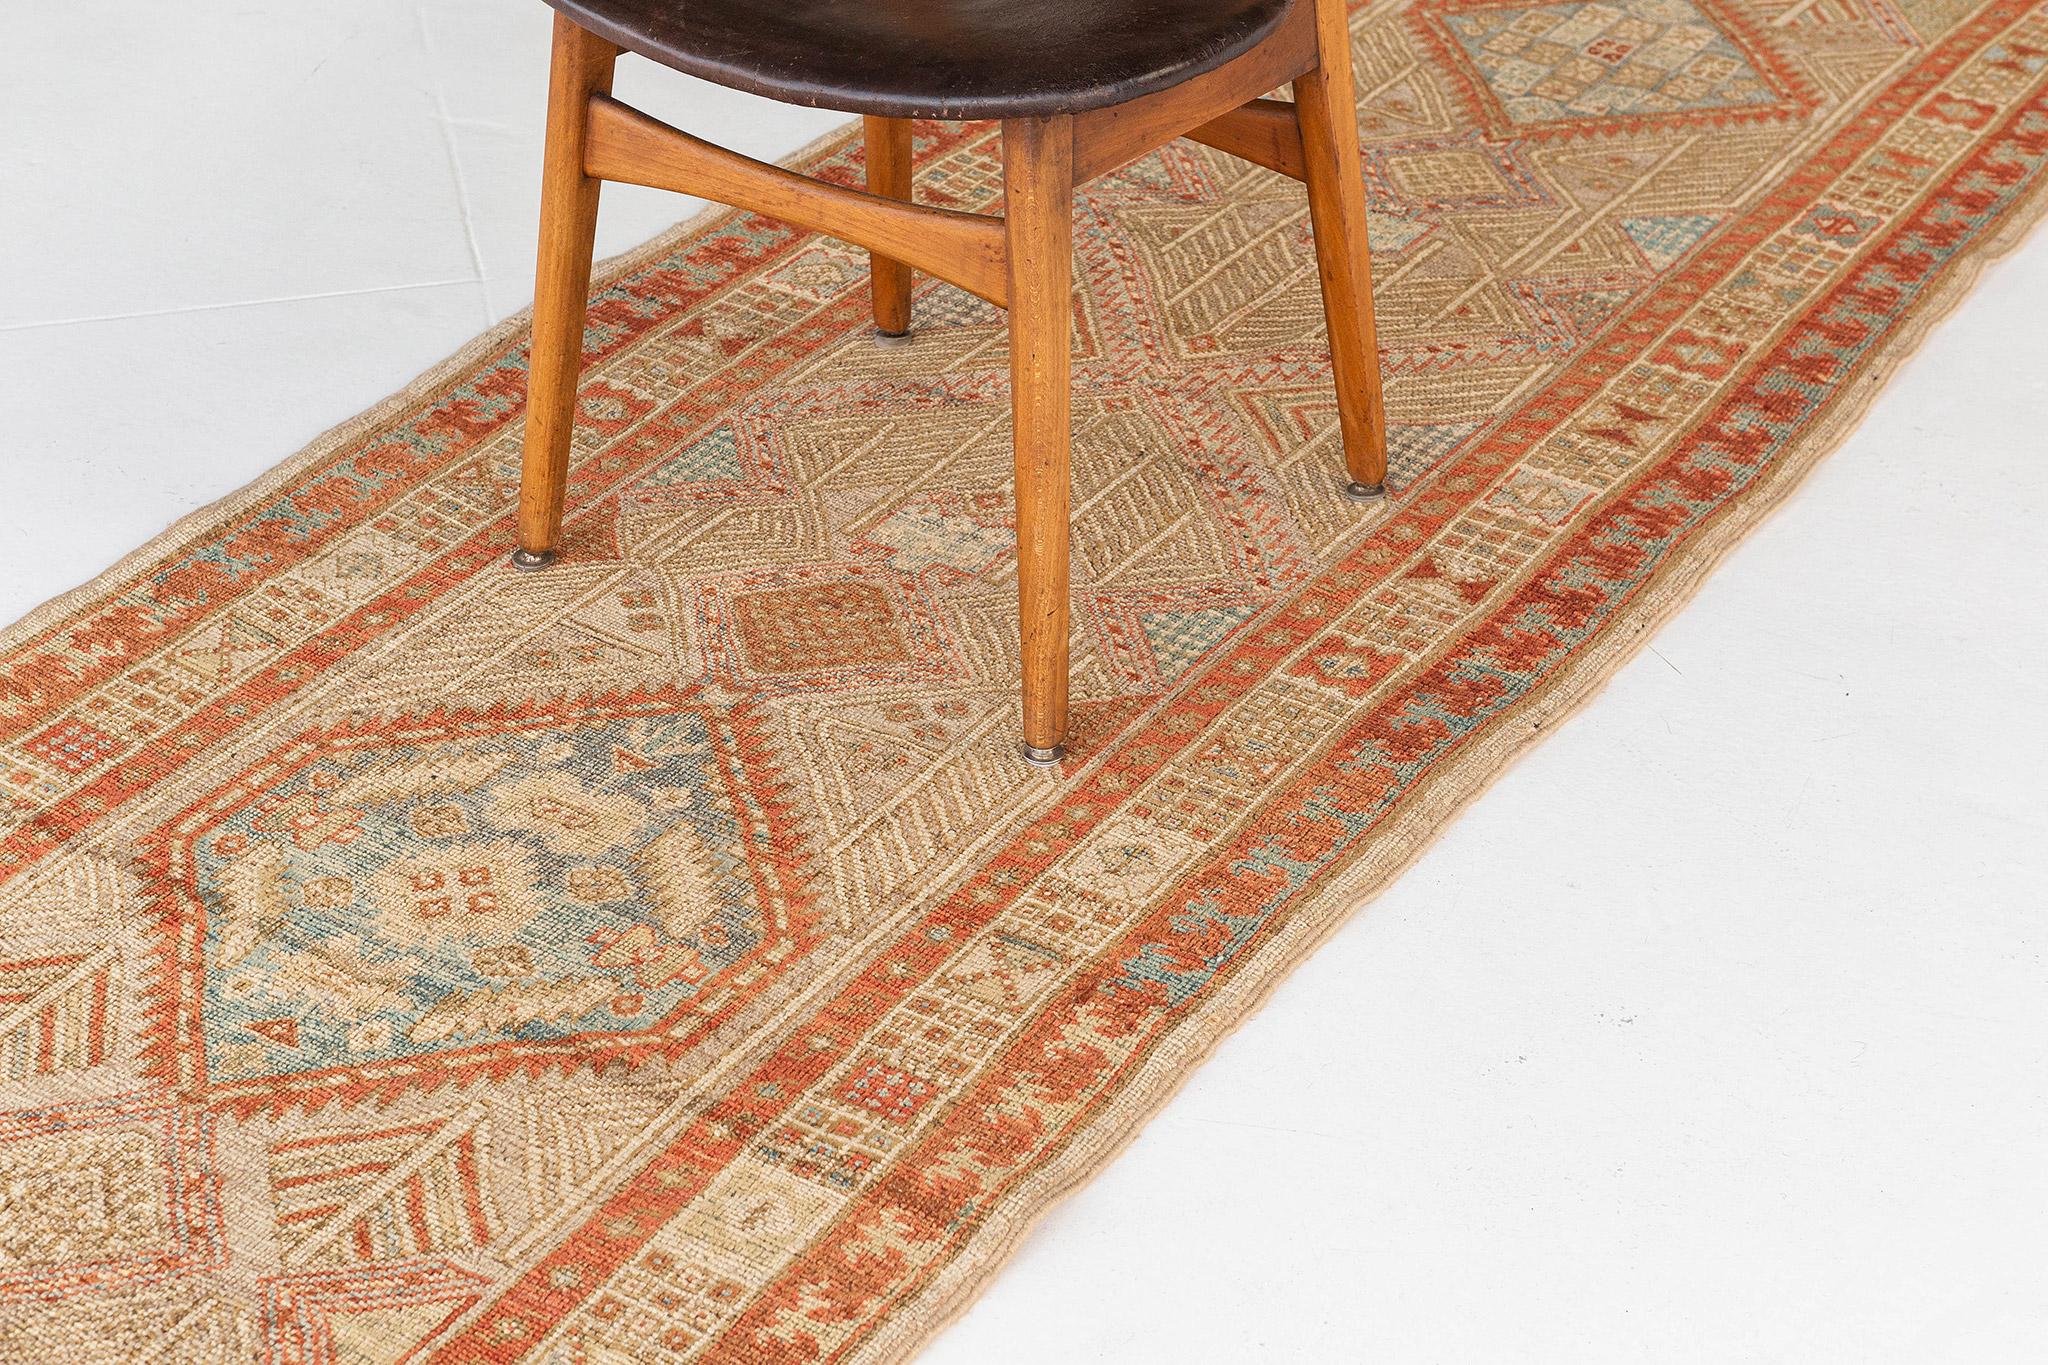 A fabulous Persian Malayer Runner that boasts its dazzling design. Centrally focused in its intricate composition of geometric motifs and linear composition, this majestic rug features the warm and vibrant tones of gold and teracotta. The attention